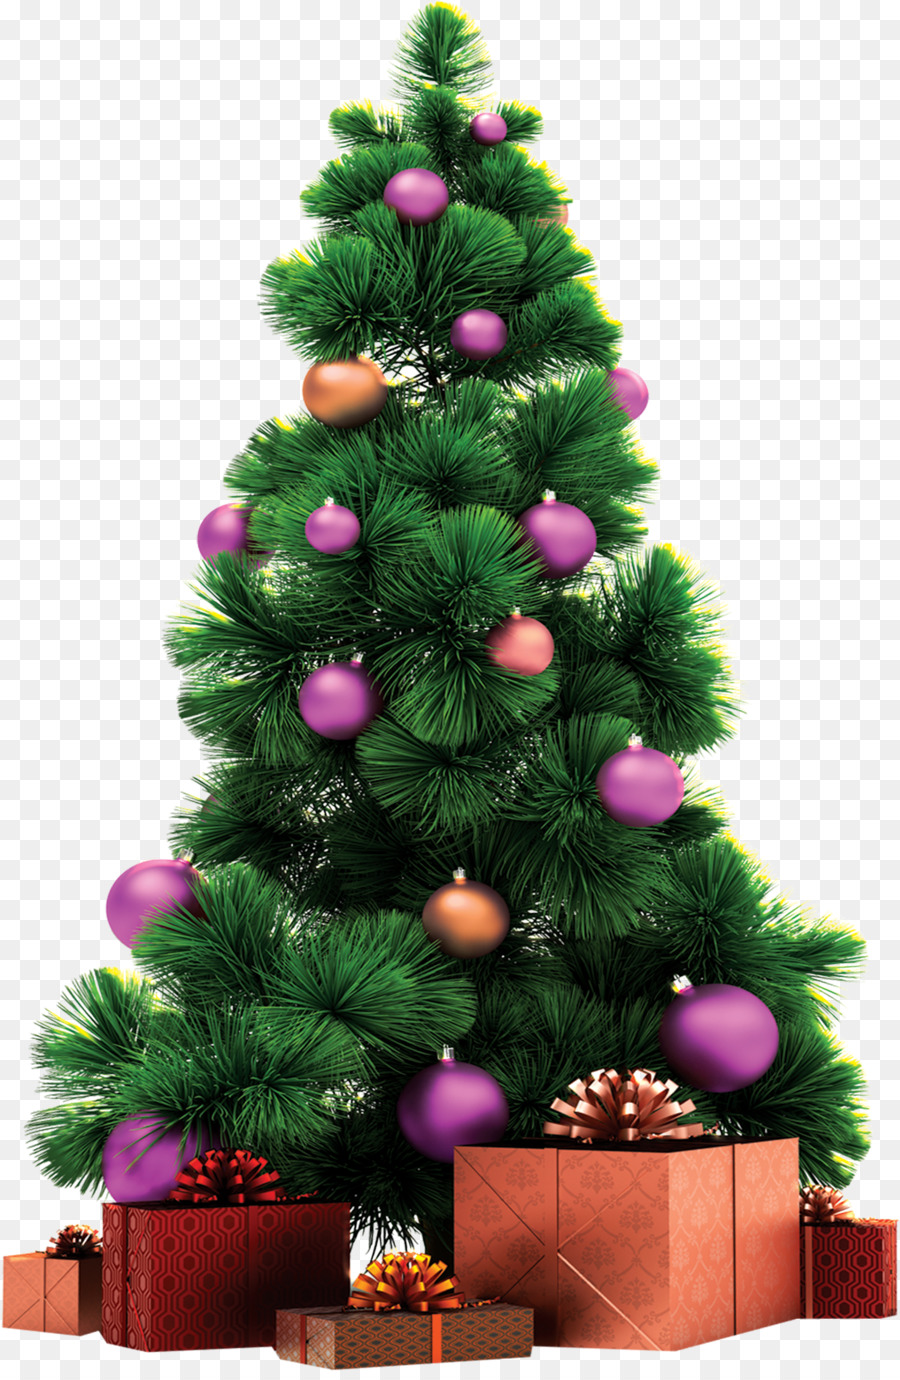 Christmas tree New Year tree - strawberry tree png download - 1476*2248 - Free Transparent Christmas Tree png Download.